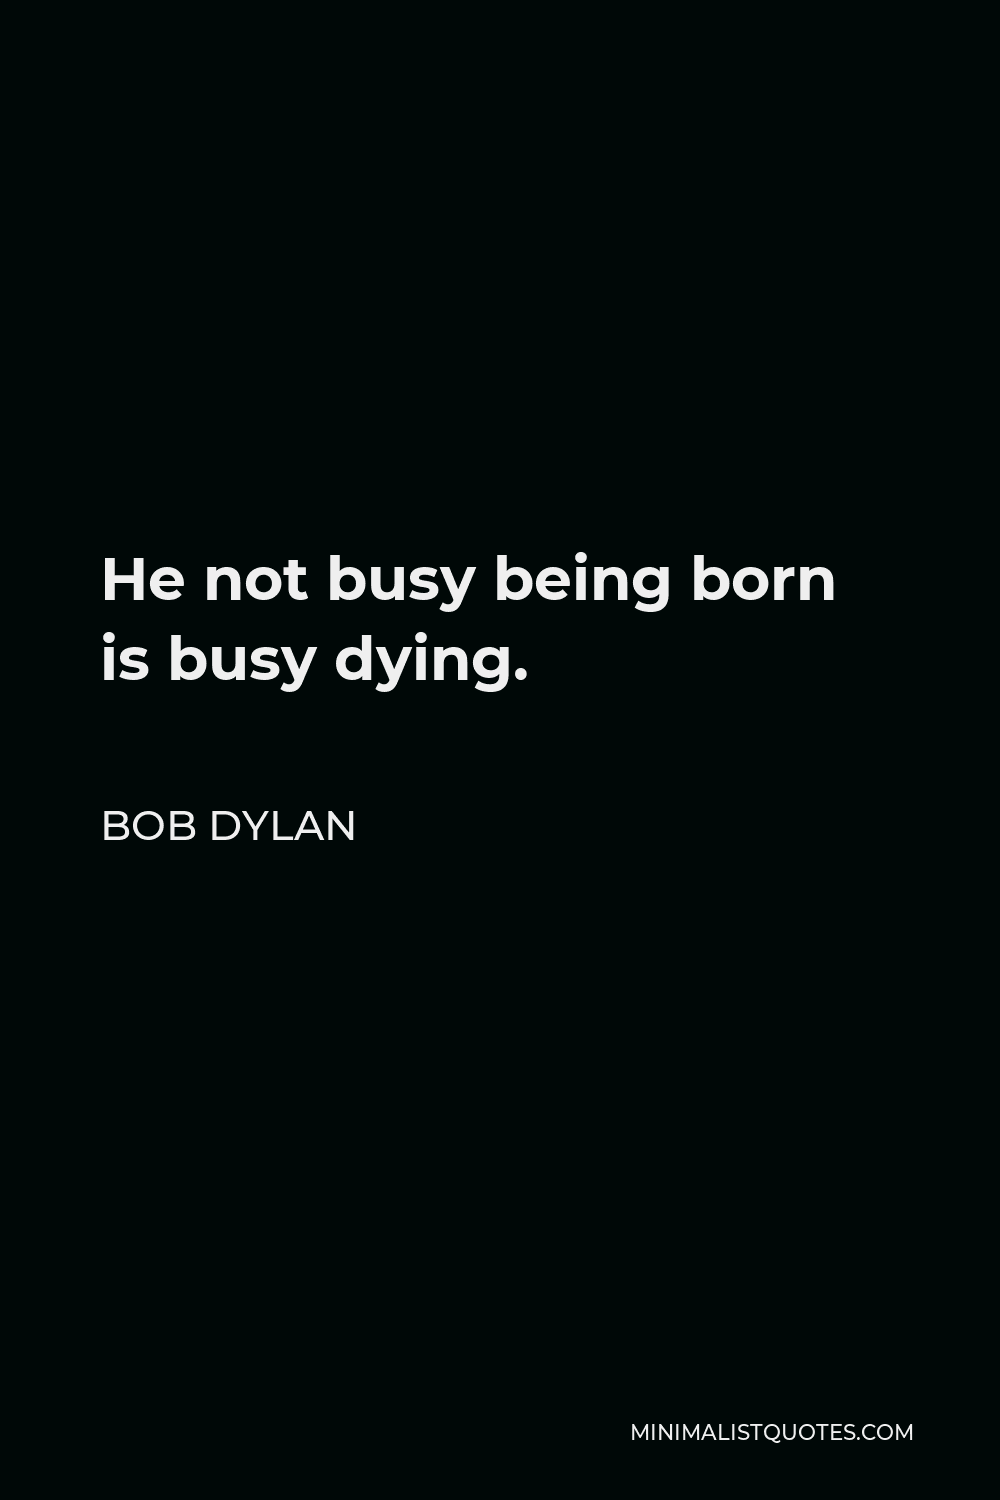 Bob Dylan Quote - He not busy being born is busy dying.